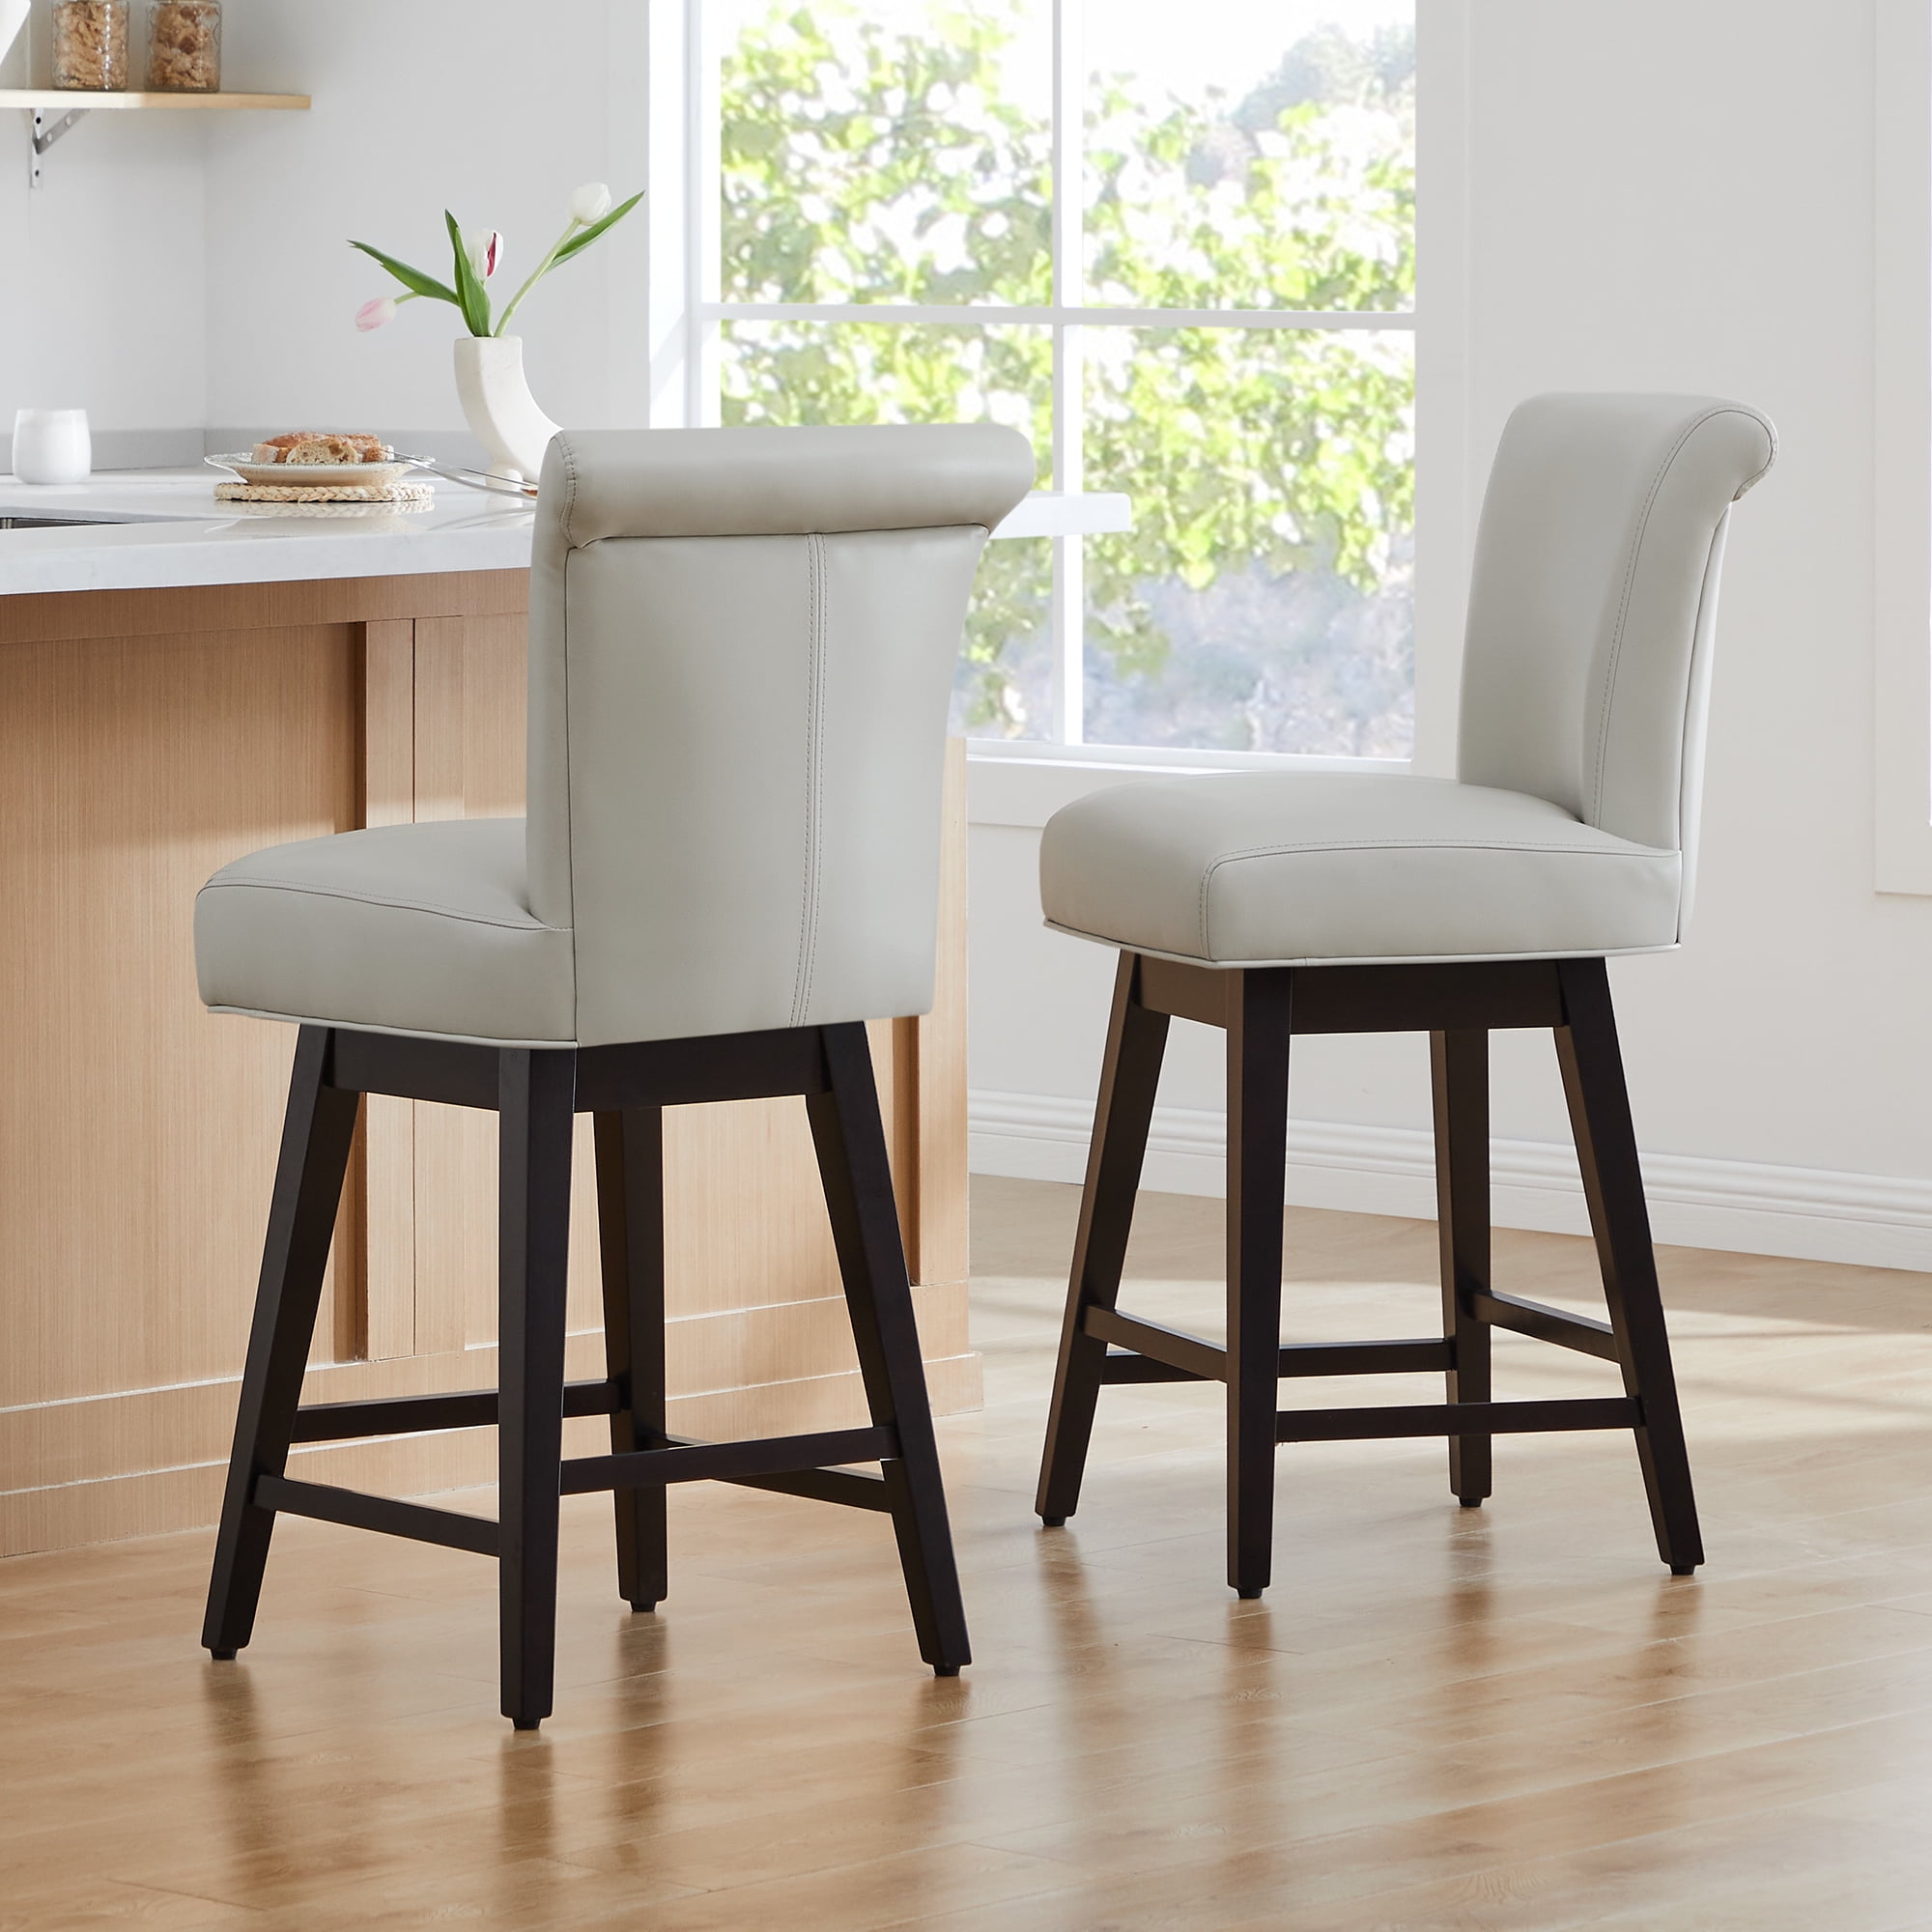 CHITA 26 in Upholstered Swivel Counter Bar Stools with Back&Wood Legs ...